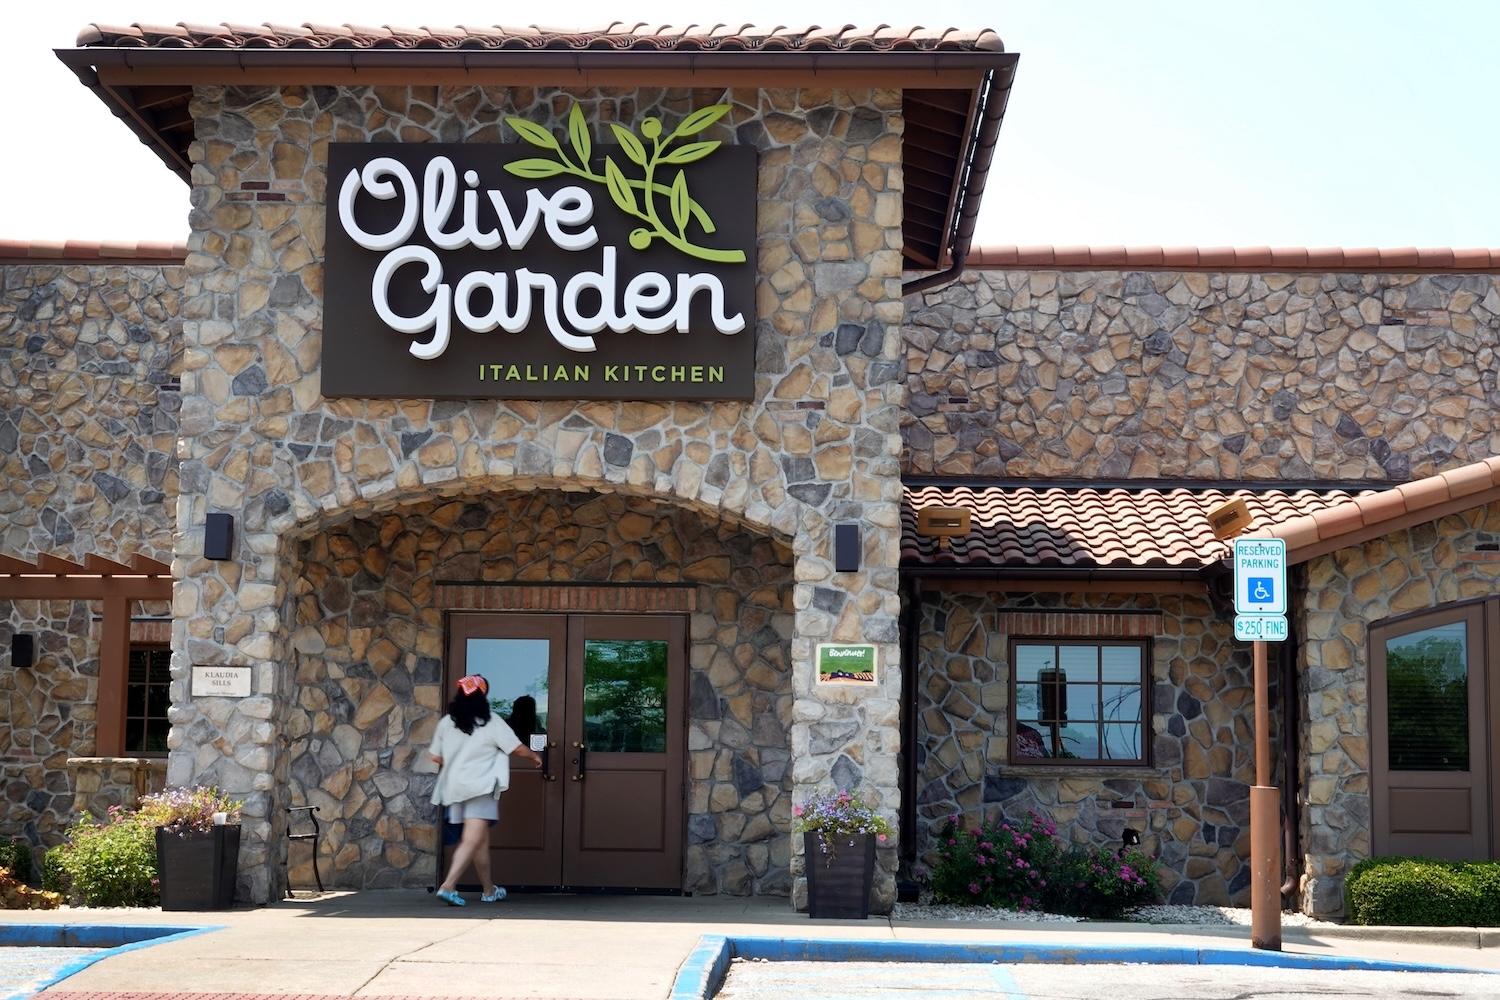 You Can Now Buy The Olive Garden Cheese Graters!